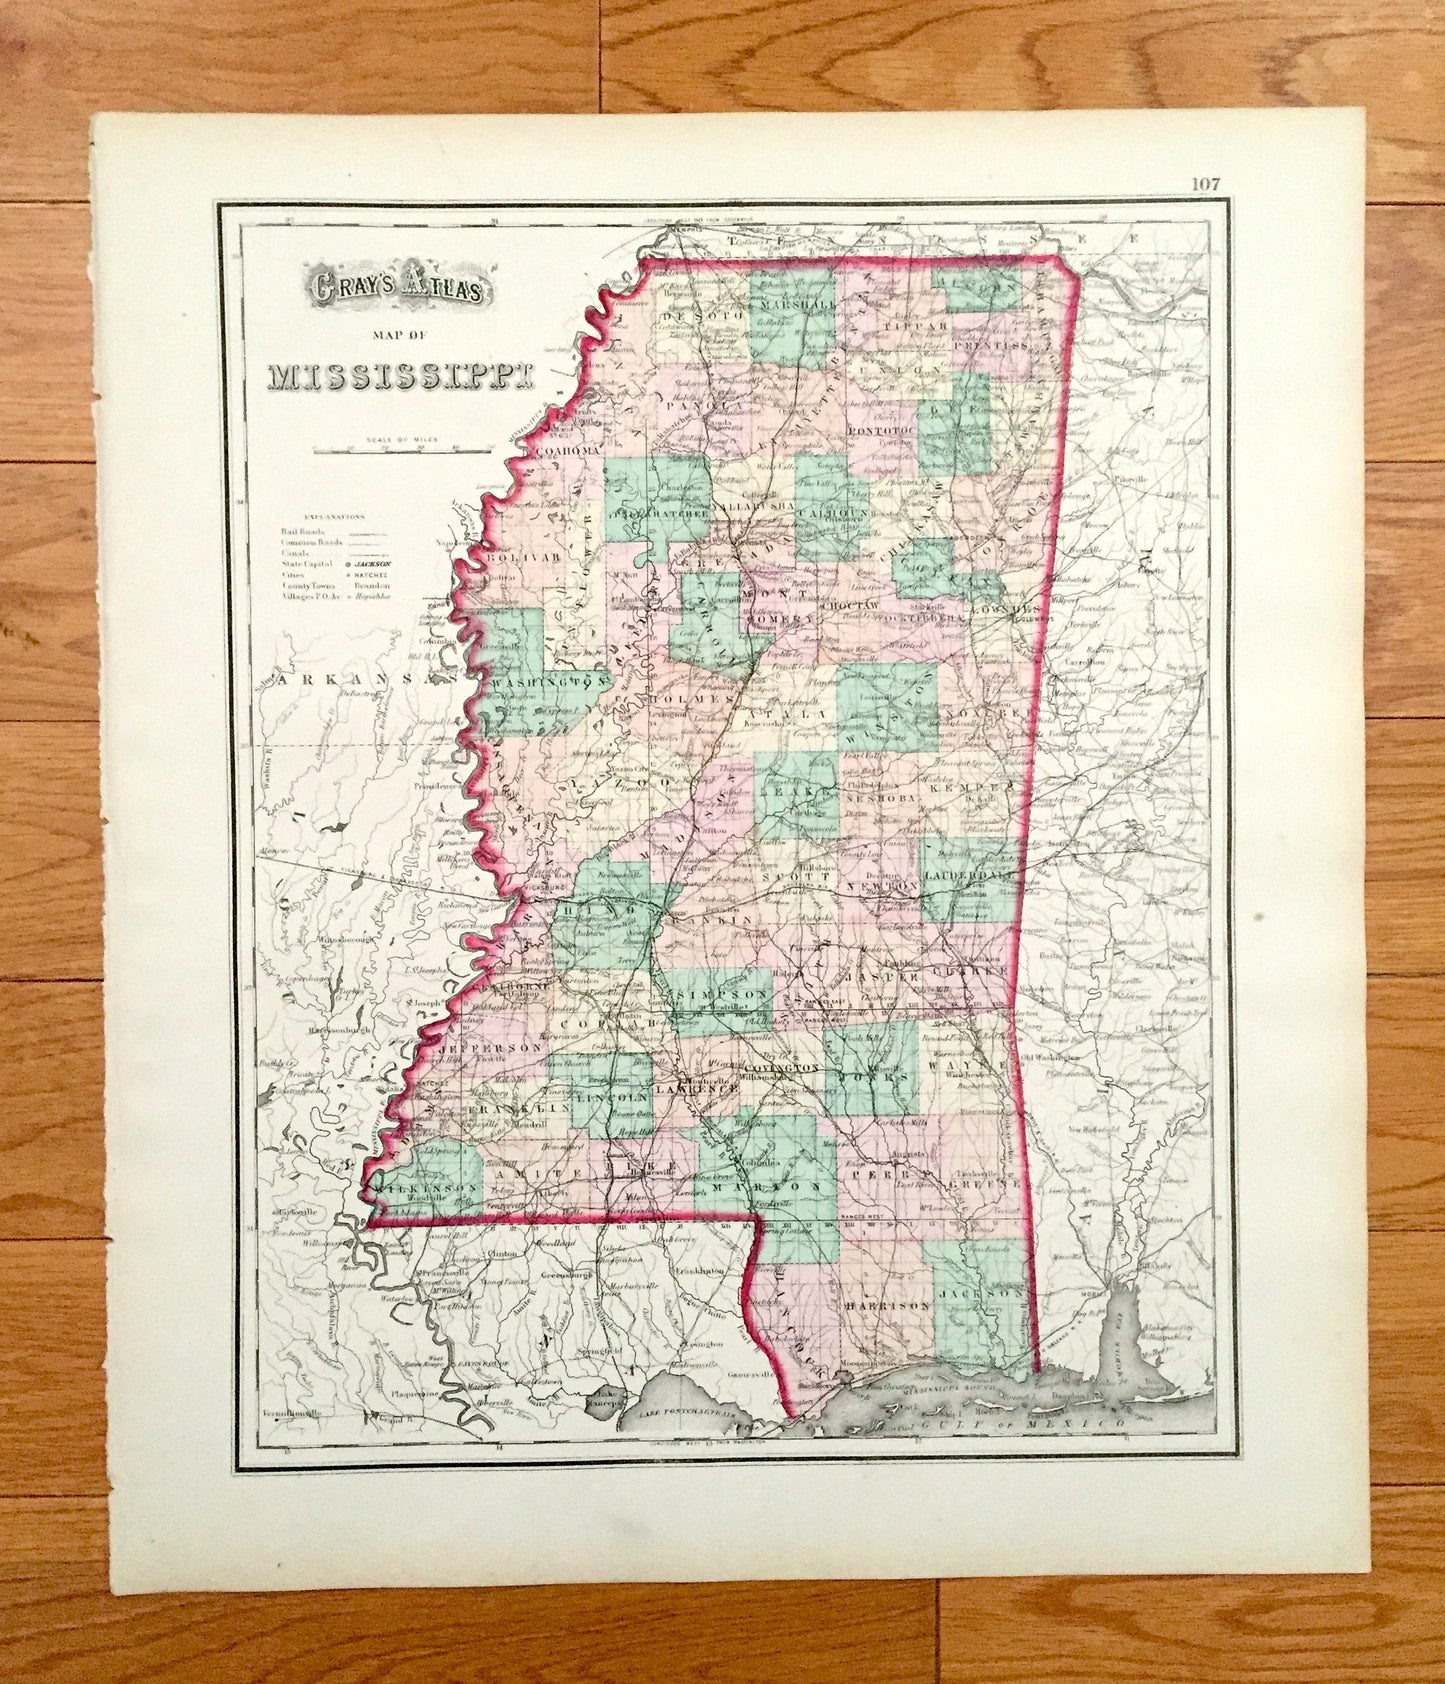 Antique 1874 Mississippi / Louisiana State Map from O.W. Gray's Atlas of United States of America; Stedman, Brown & Lyon – New Orleans